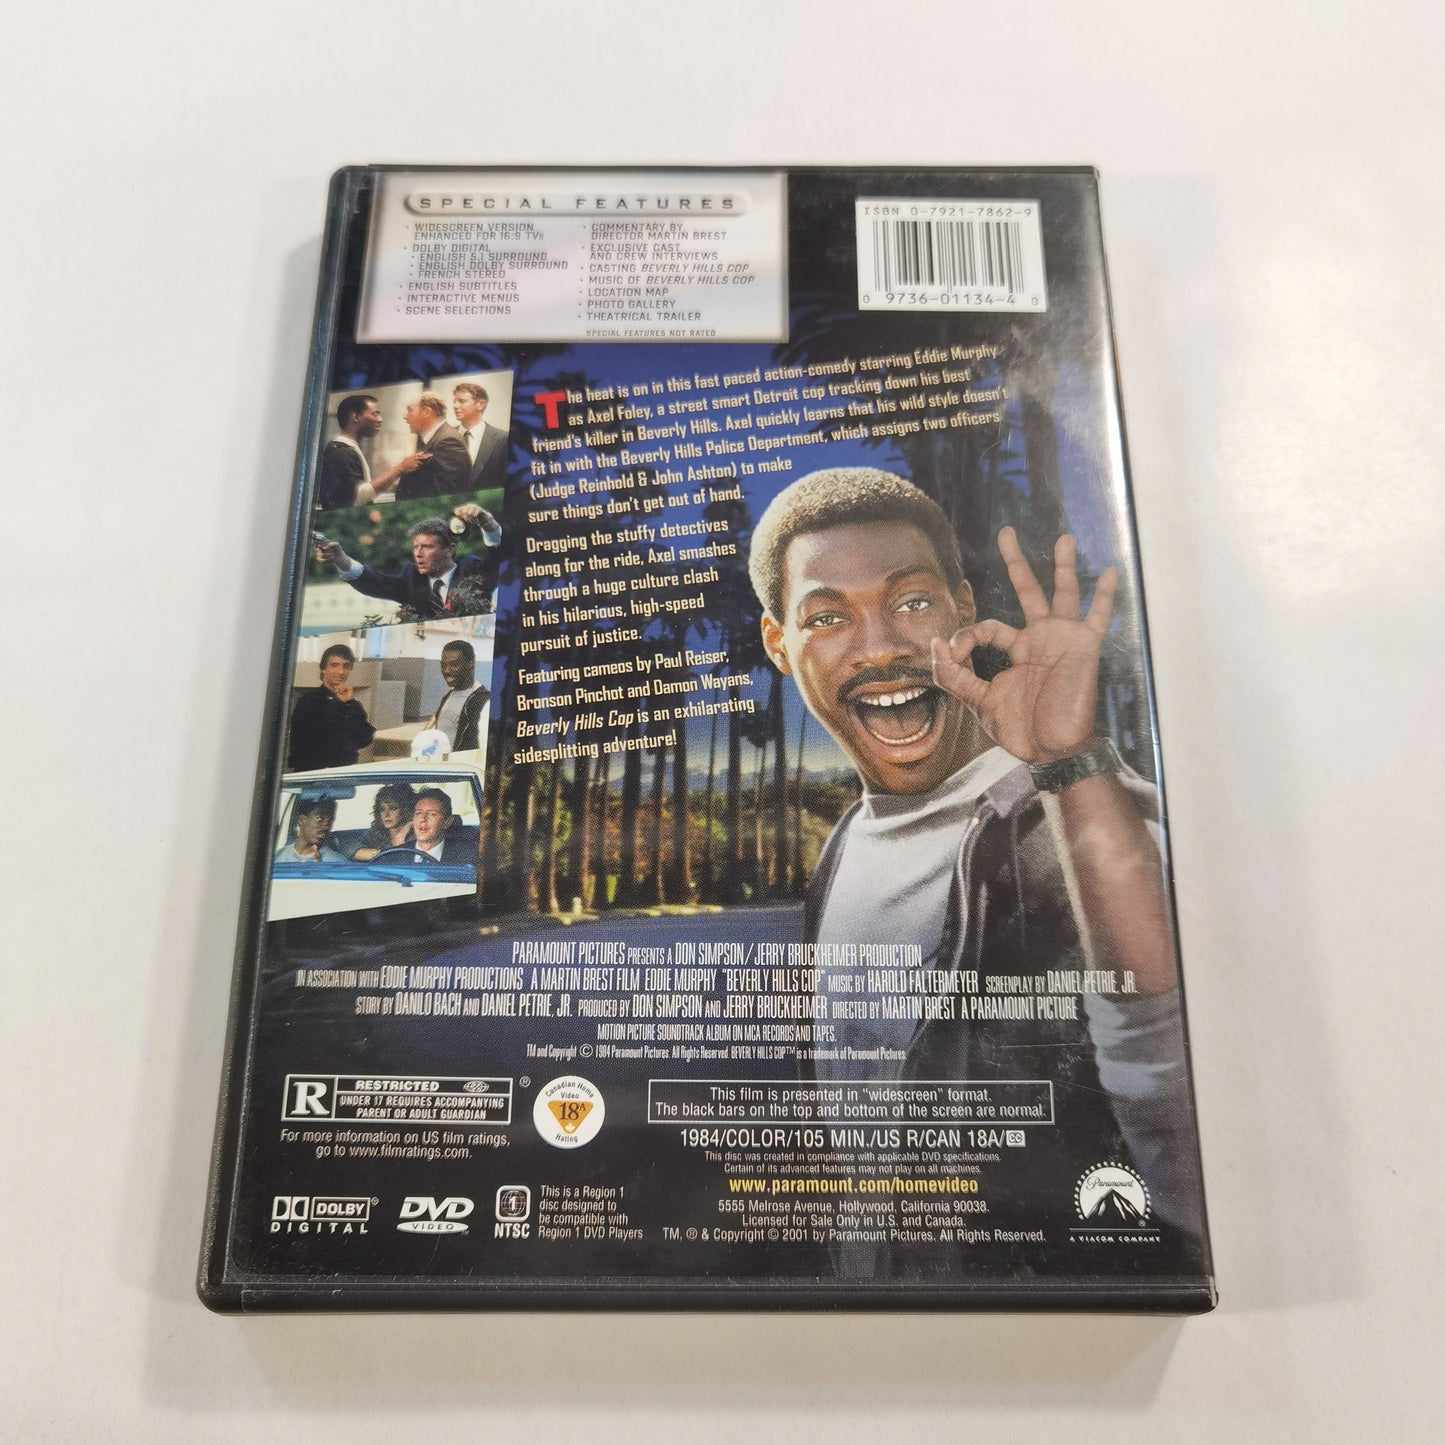 Beverly Hills Cop (1984) - DVD US 2001 Special Collector's Edition